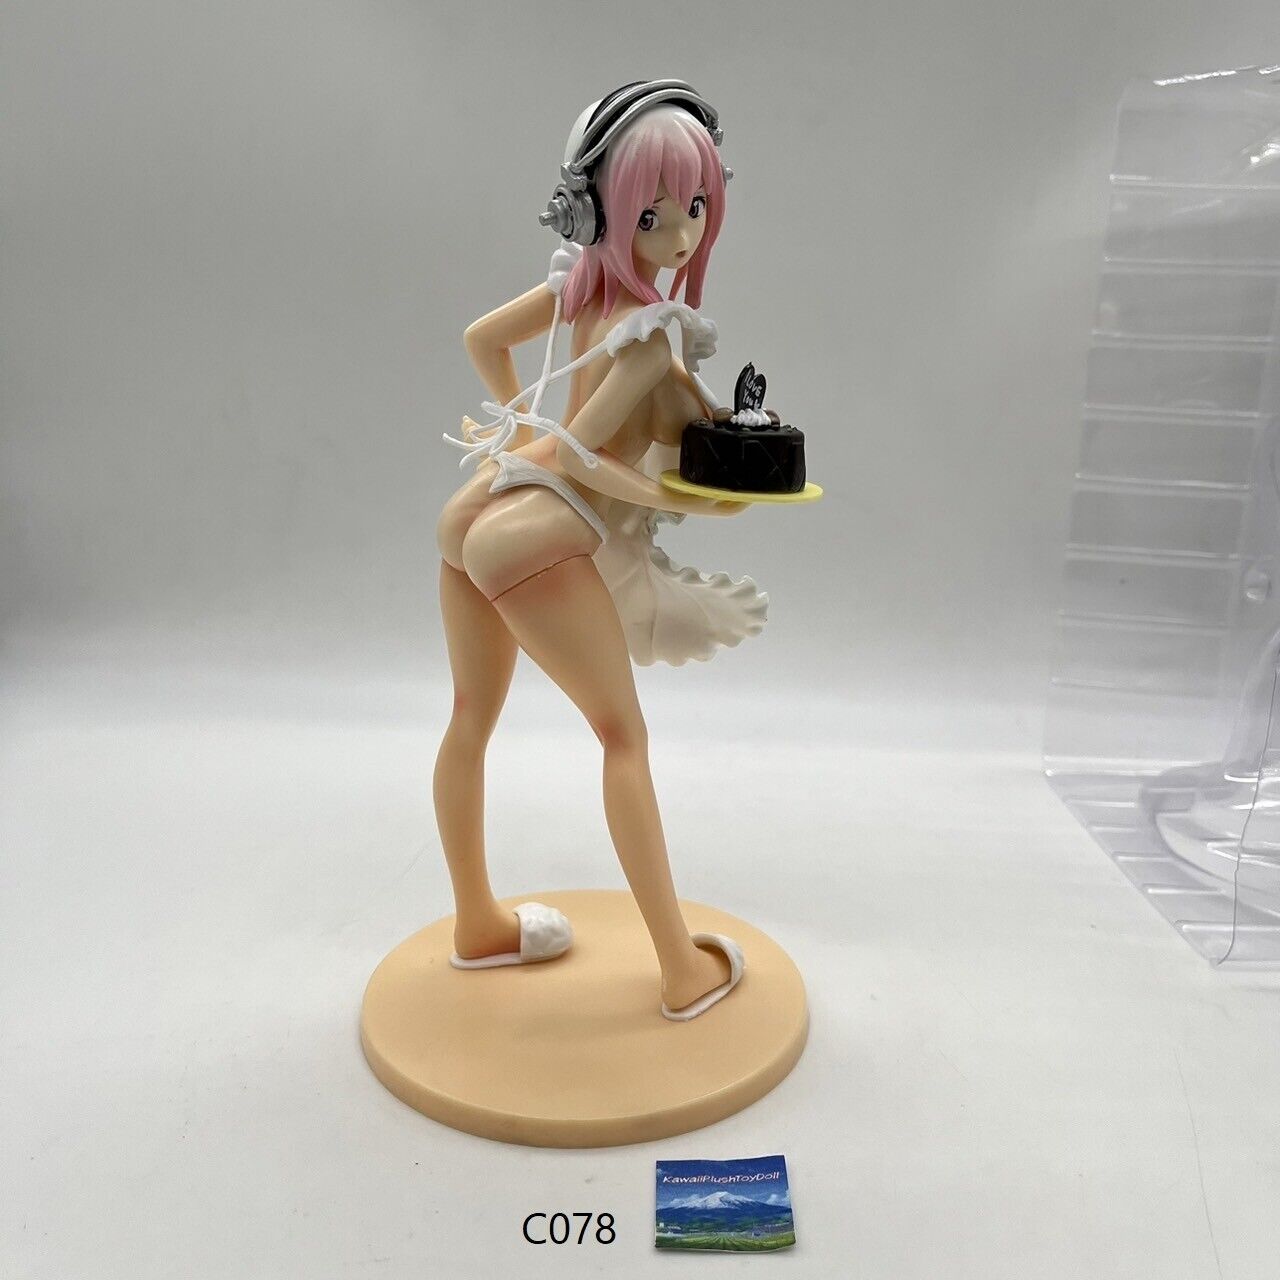 Super Sonico C078 Nitro+ 1/7 Scale Figure Rare Orchid Seed from Japan